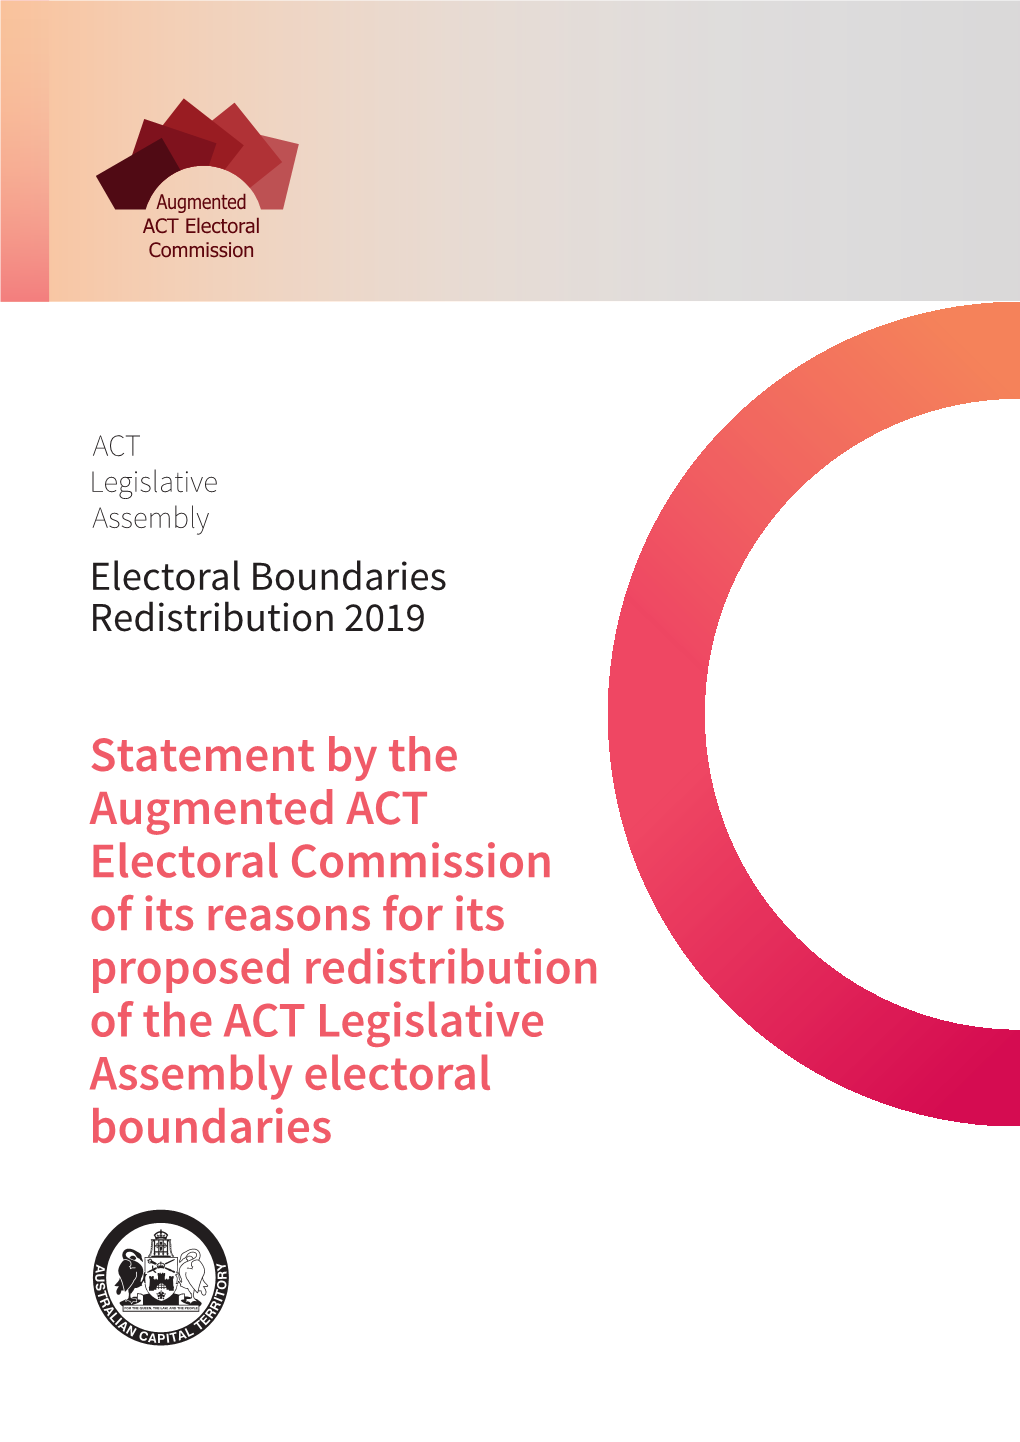 Statement by the Augmented ACT Electoral Commission of Its Reasons for Its Proposed Redistribution of the ACT Legislative Assembly Electoral Boundaries